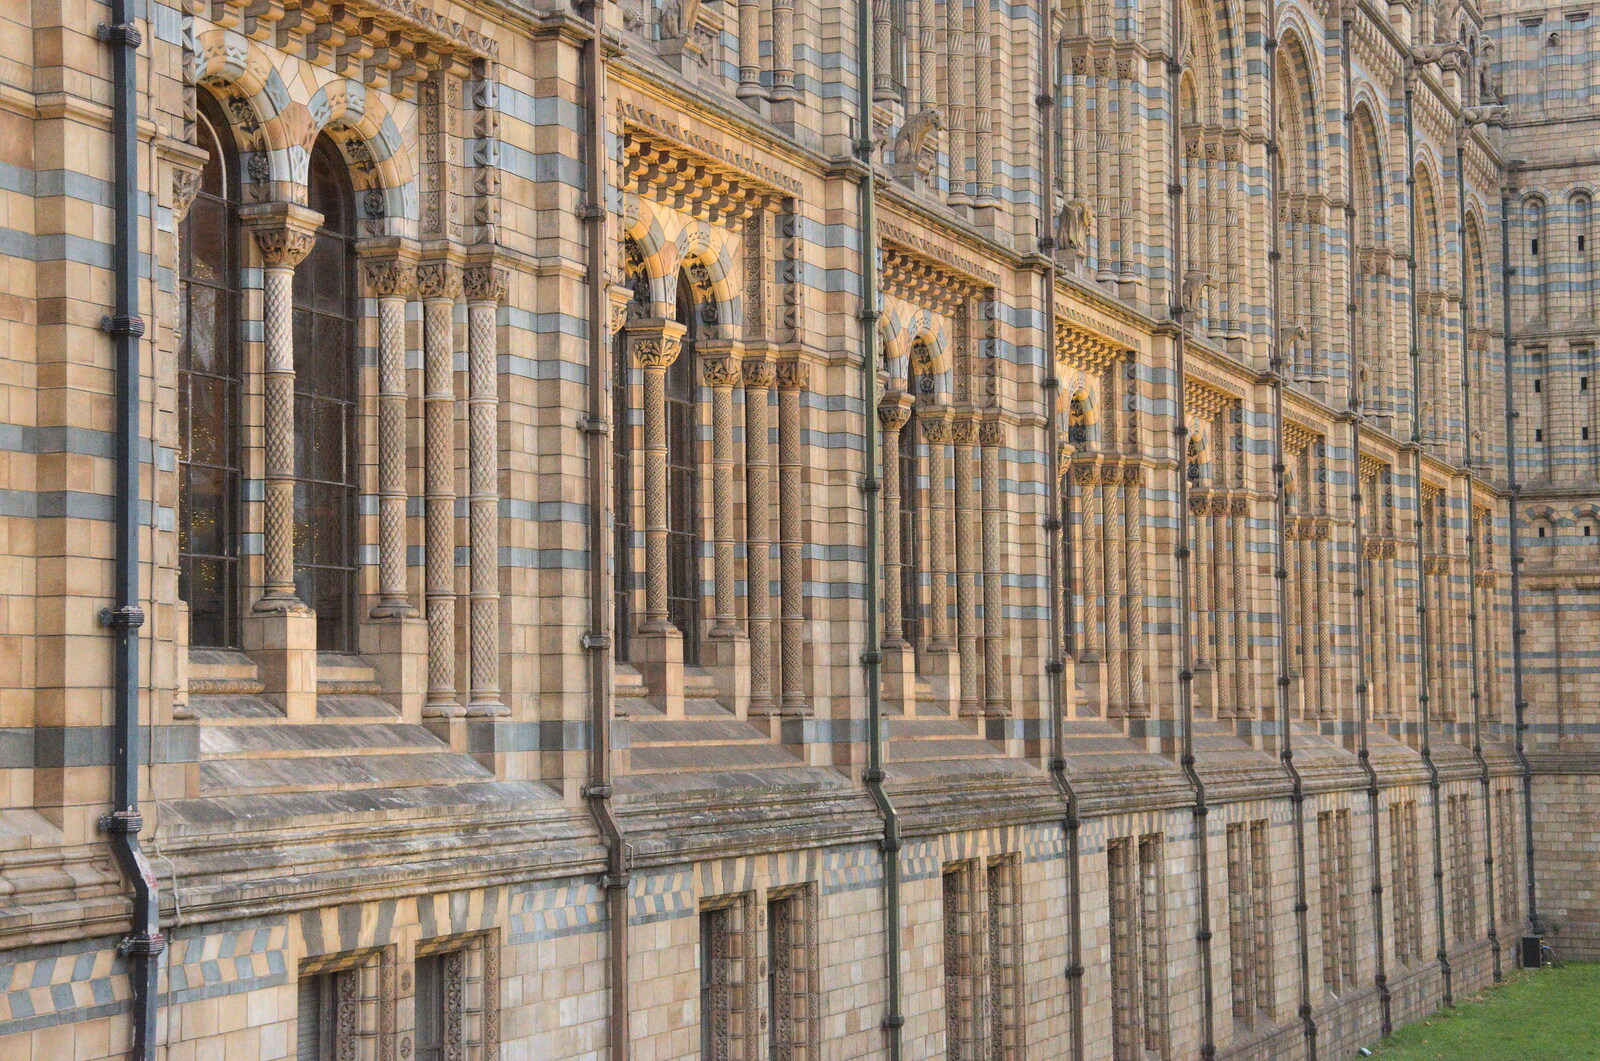 A pinnacle of Victorian architecture from A Trip to the Natural History Museum, Kensington, London - 15th January 2022